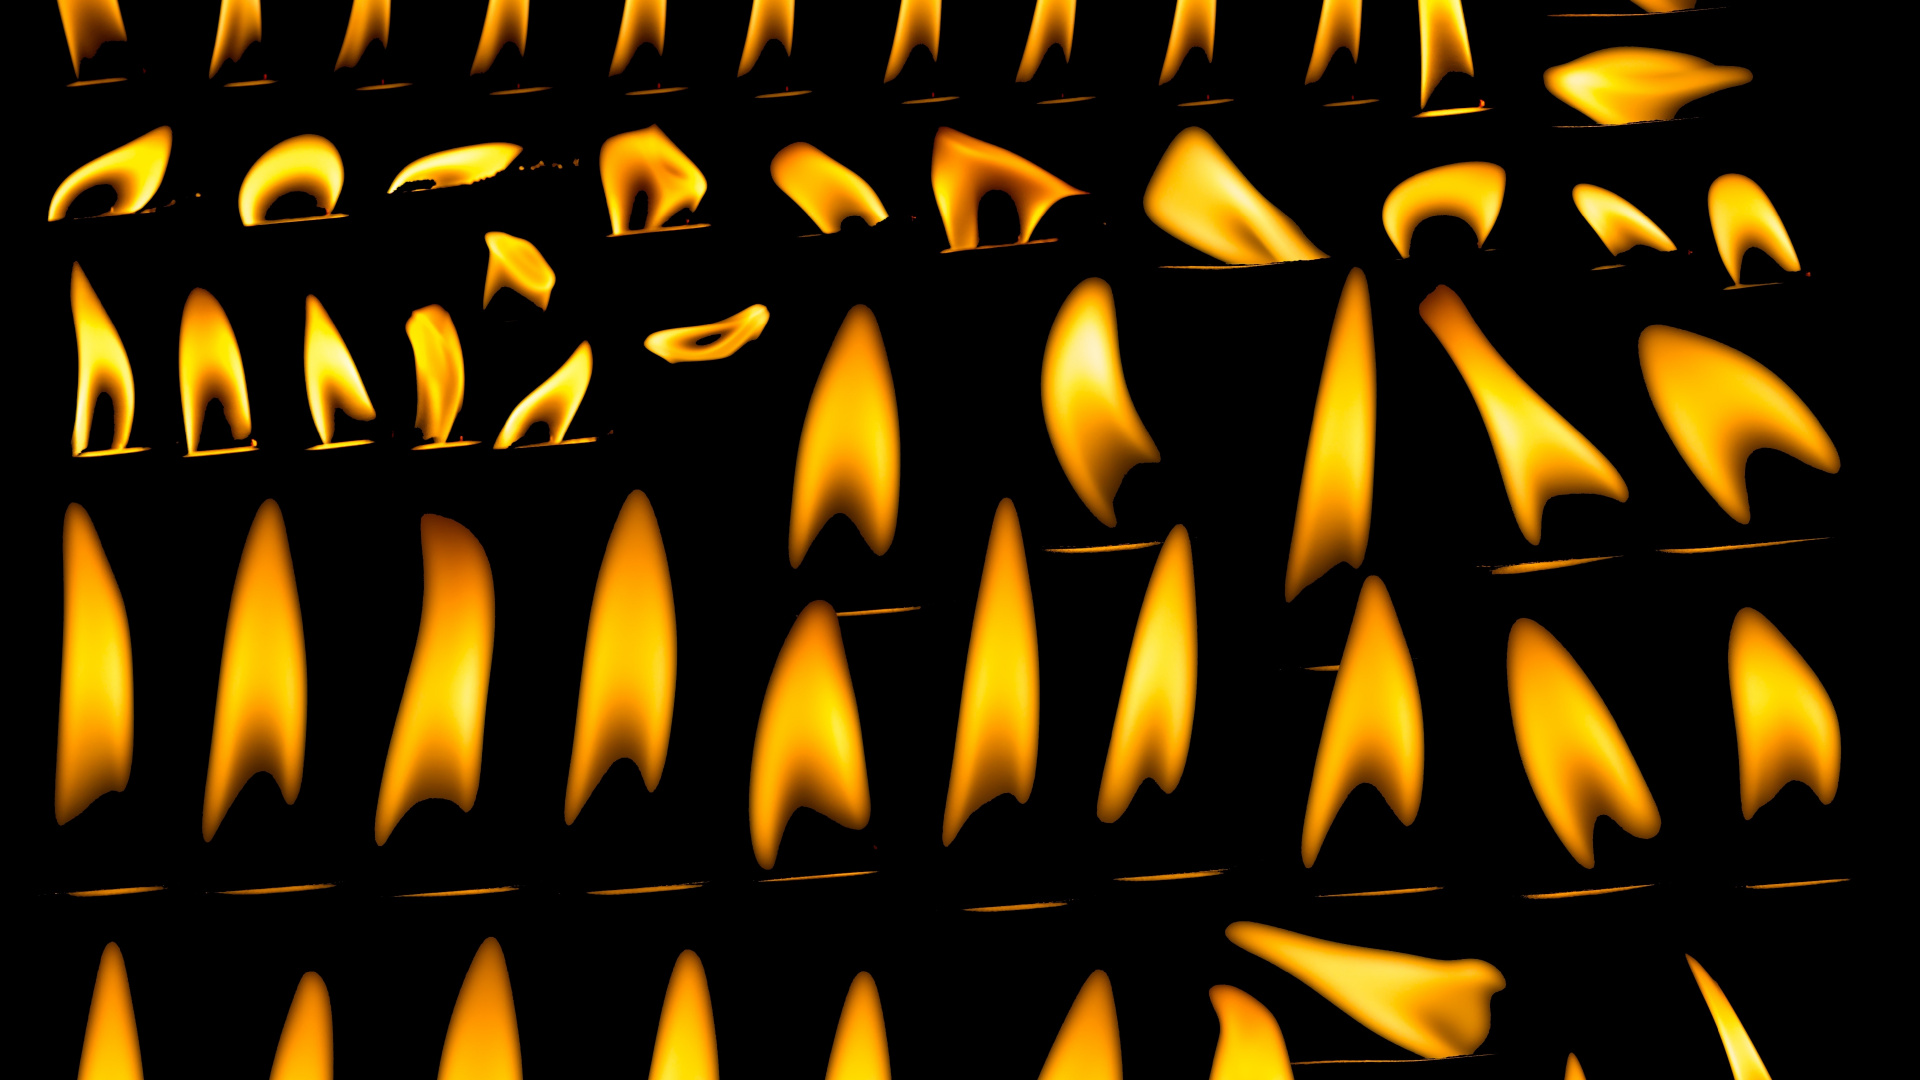 Yellow and Black Metal Frame. Wallpaper in 1920x1080 Resolution